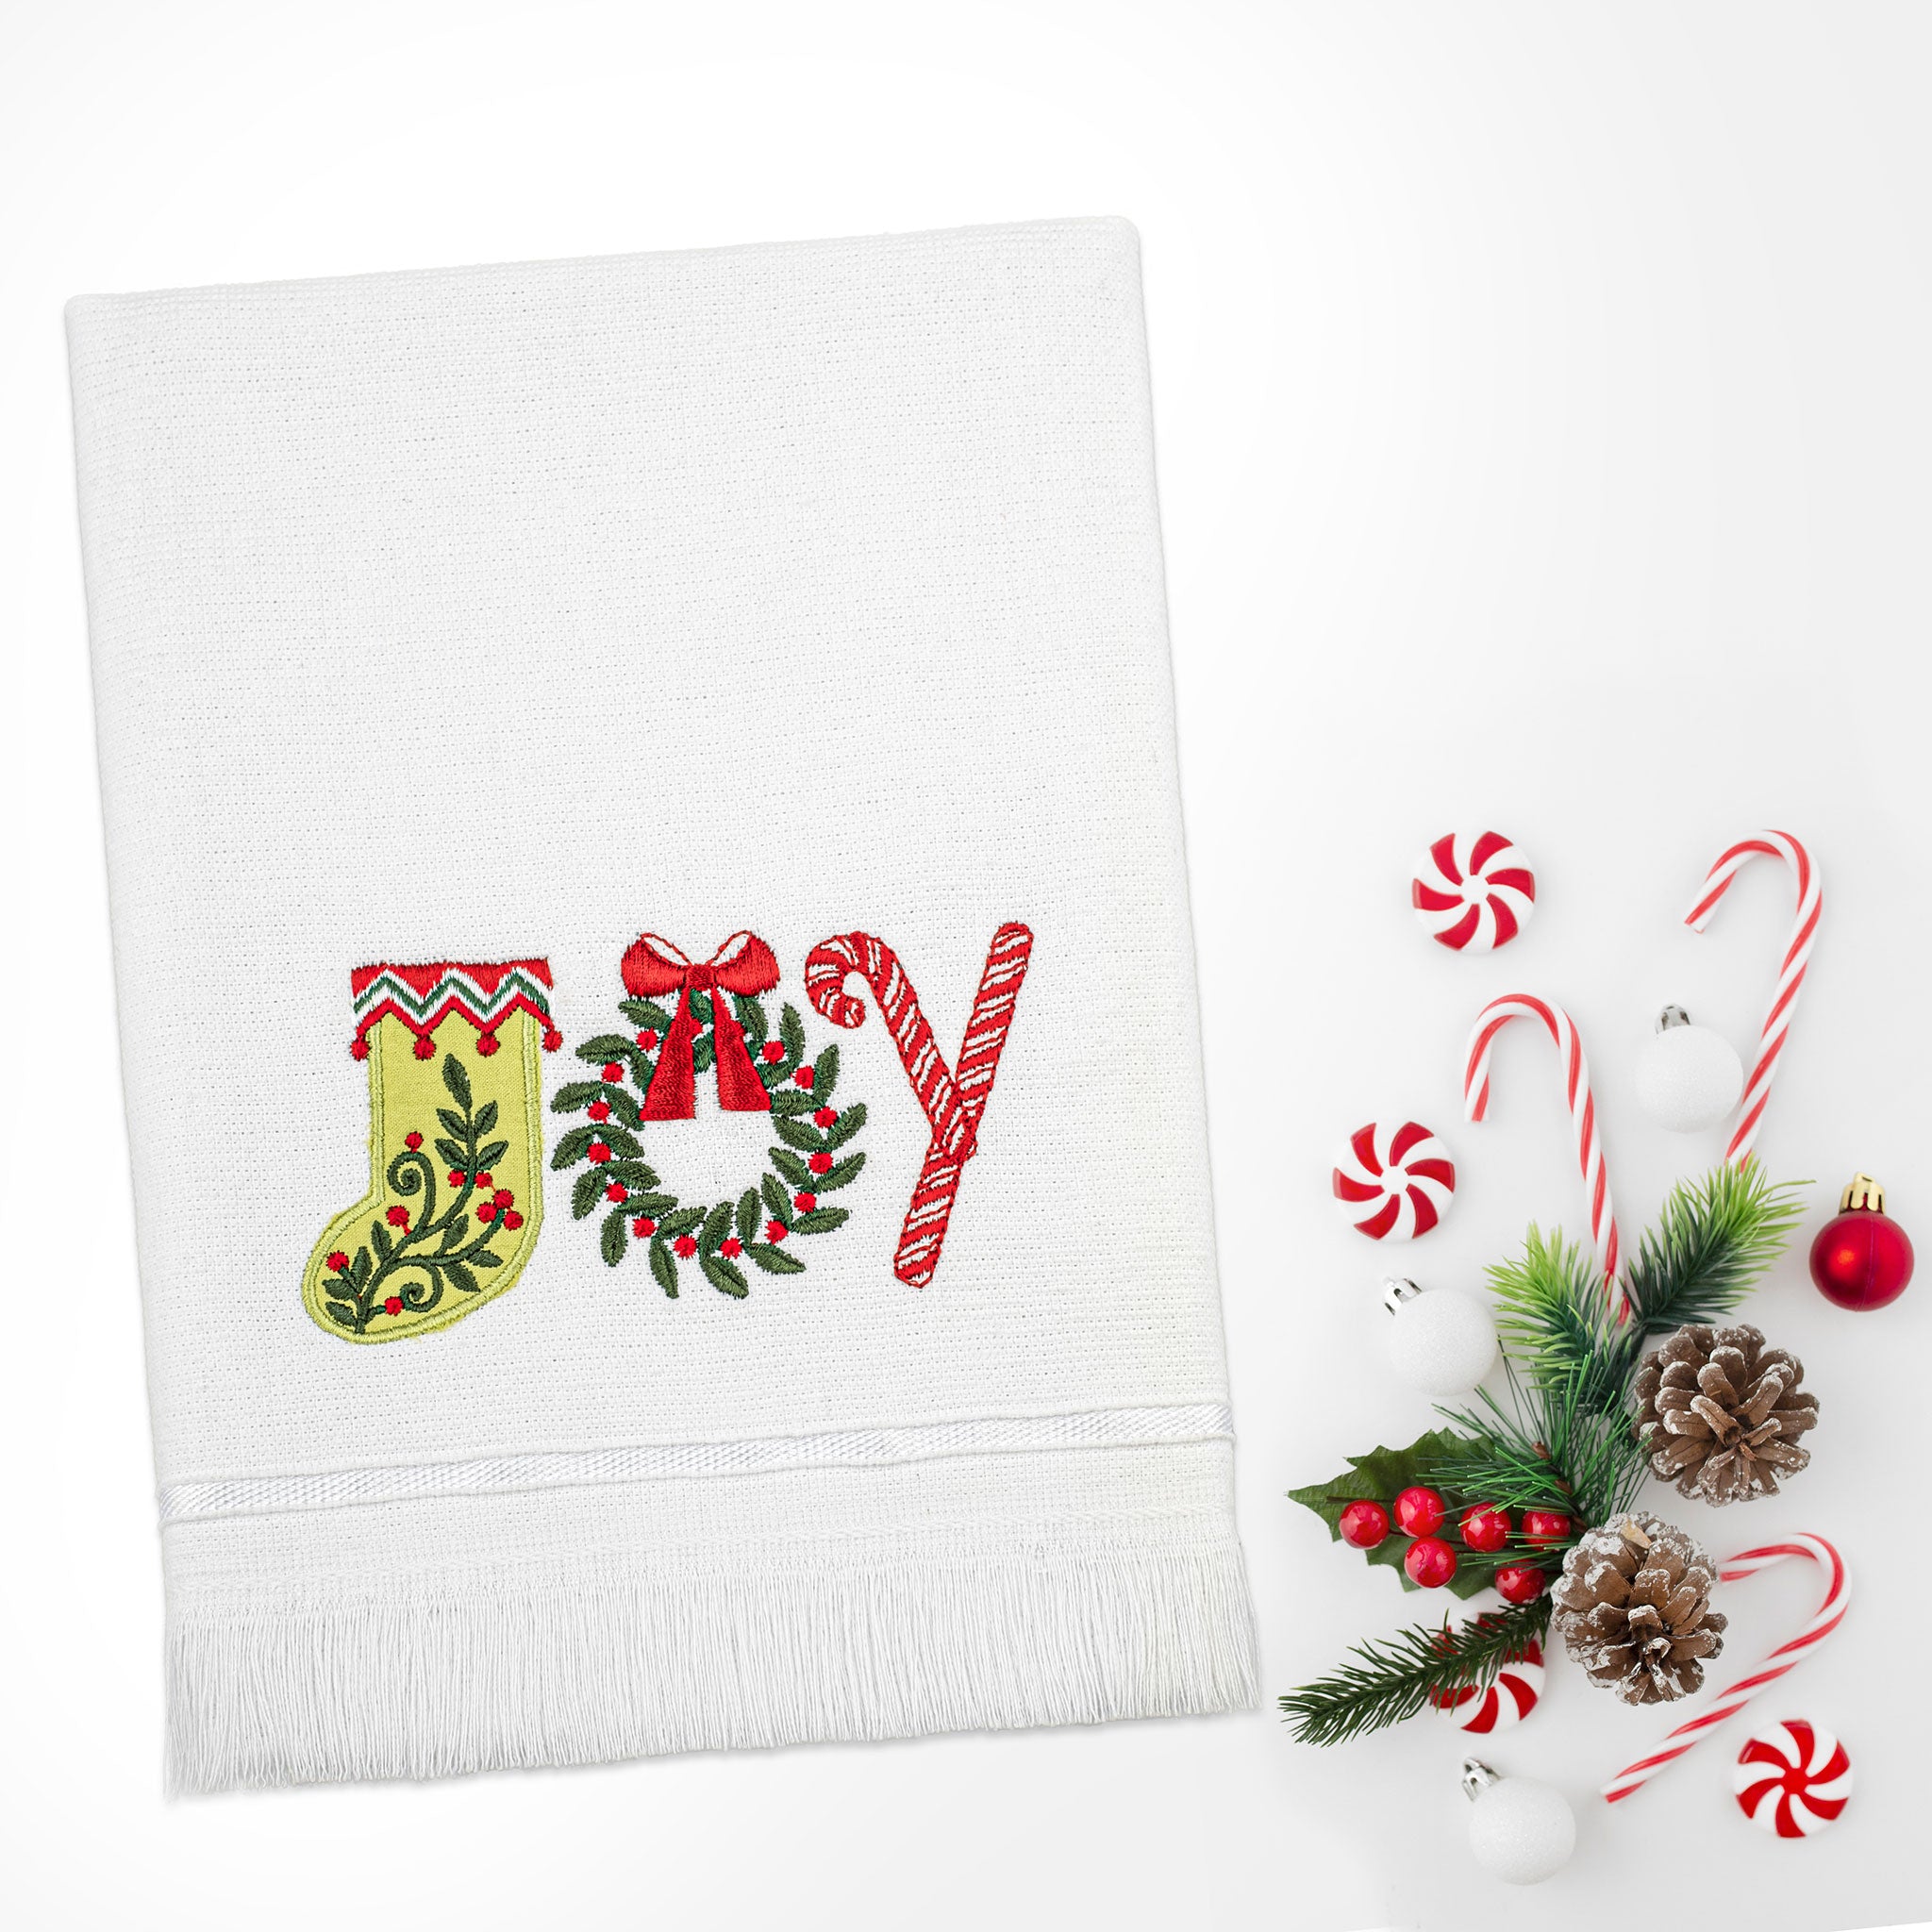  American Soft Linen - Christmas Towels Set 2 Packed Embroidered Turkish Cotton Hand Towels - Joy Cat - 7